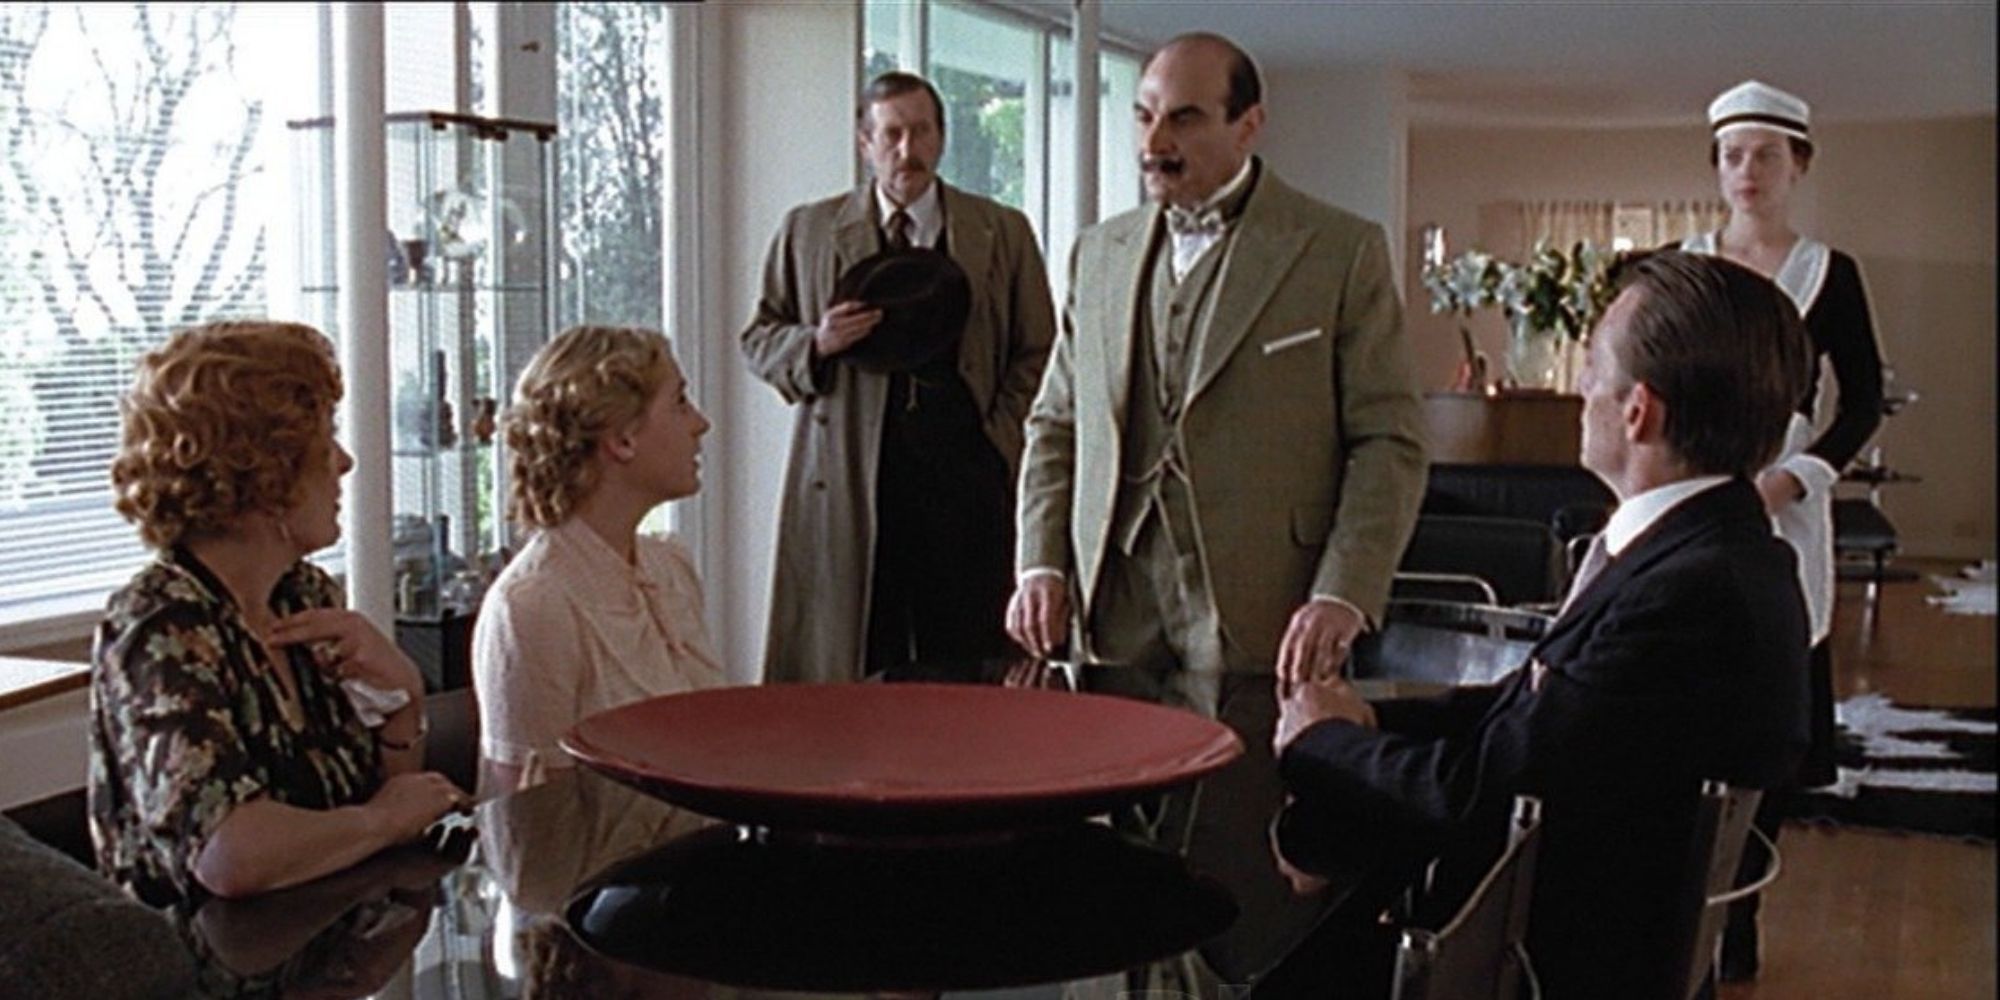 The cast of the 2000 movie The Murder Of Roger Ackroyd